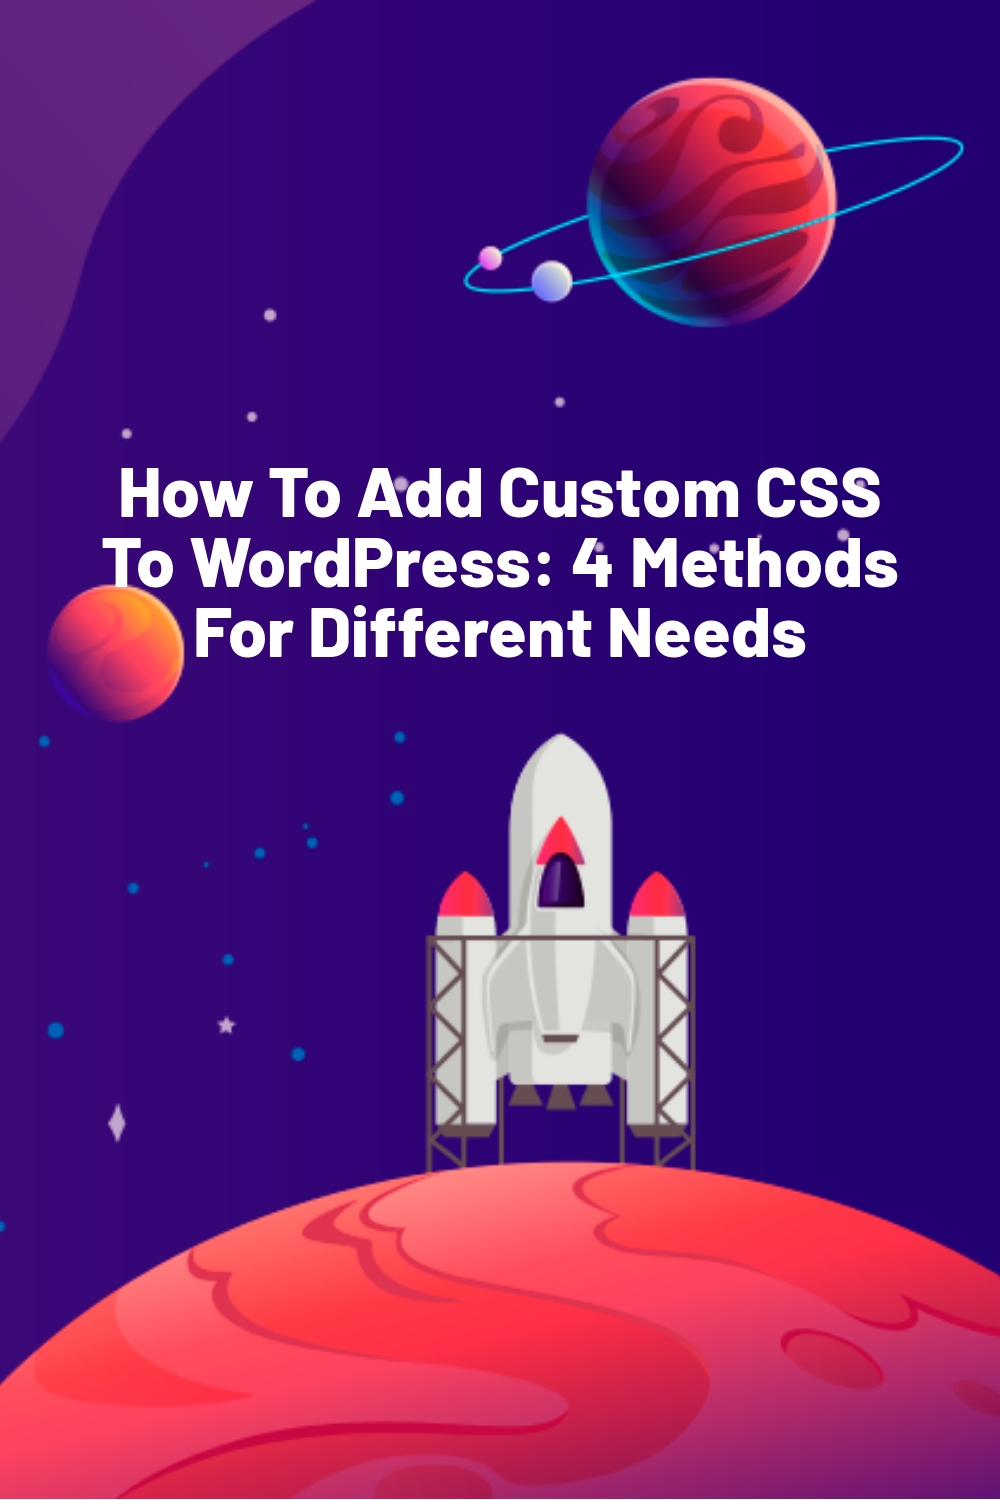 How To Add Custom CSS To WordPress: 4 Methods For Different Needs